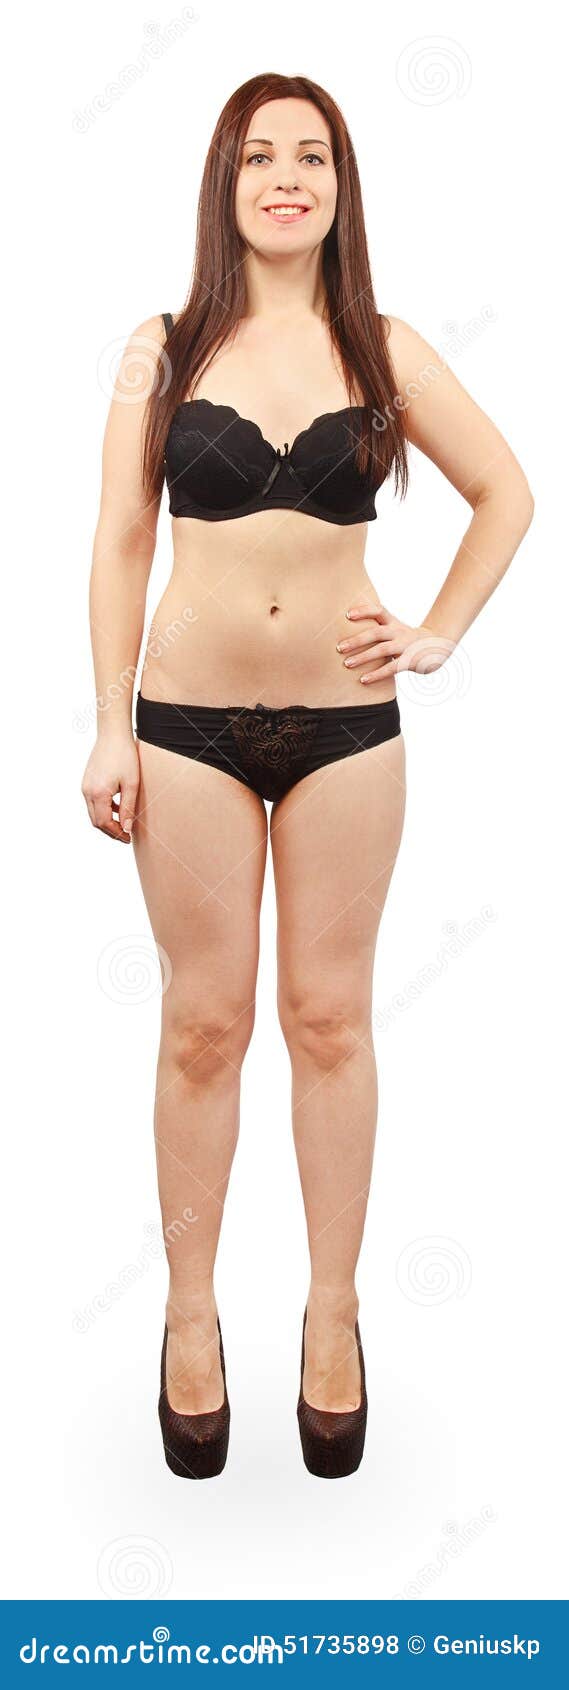 Front View of Full Body Smiling Woman with Black Underwear Stock